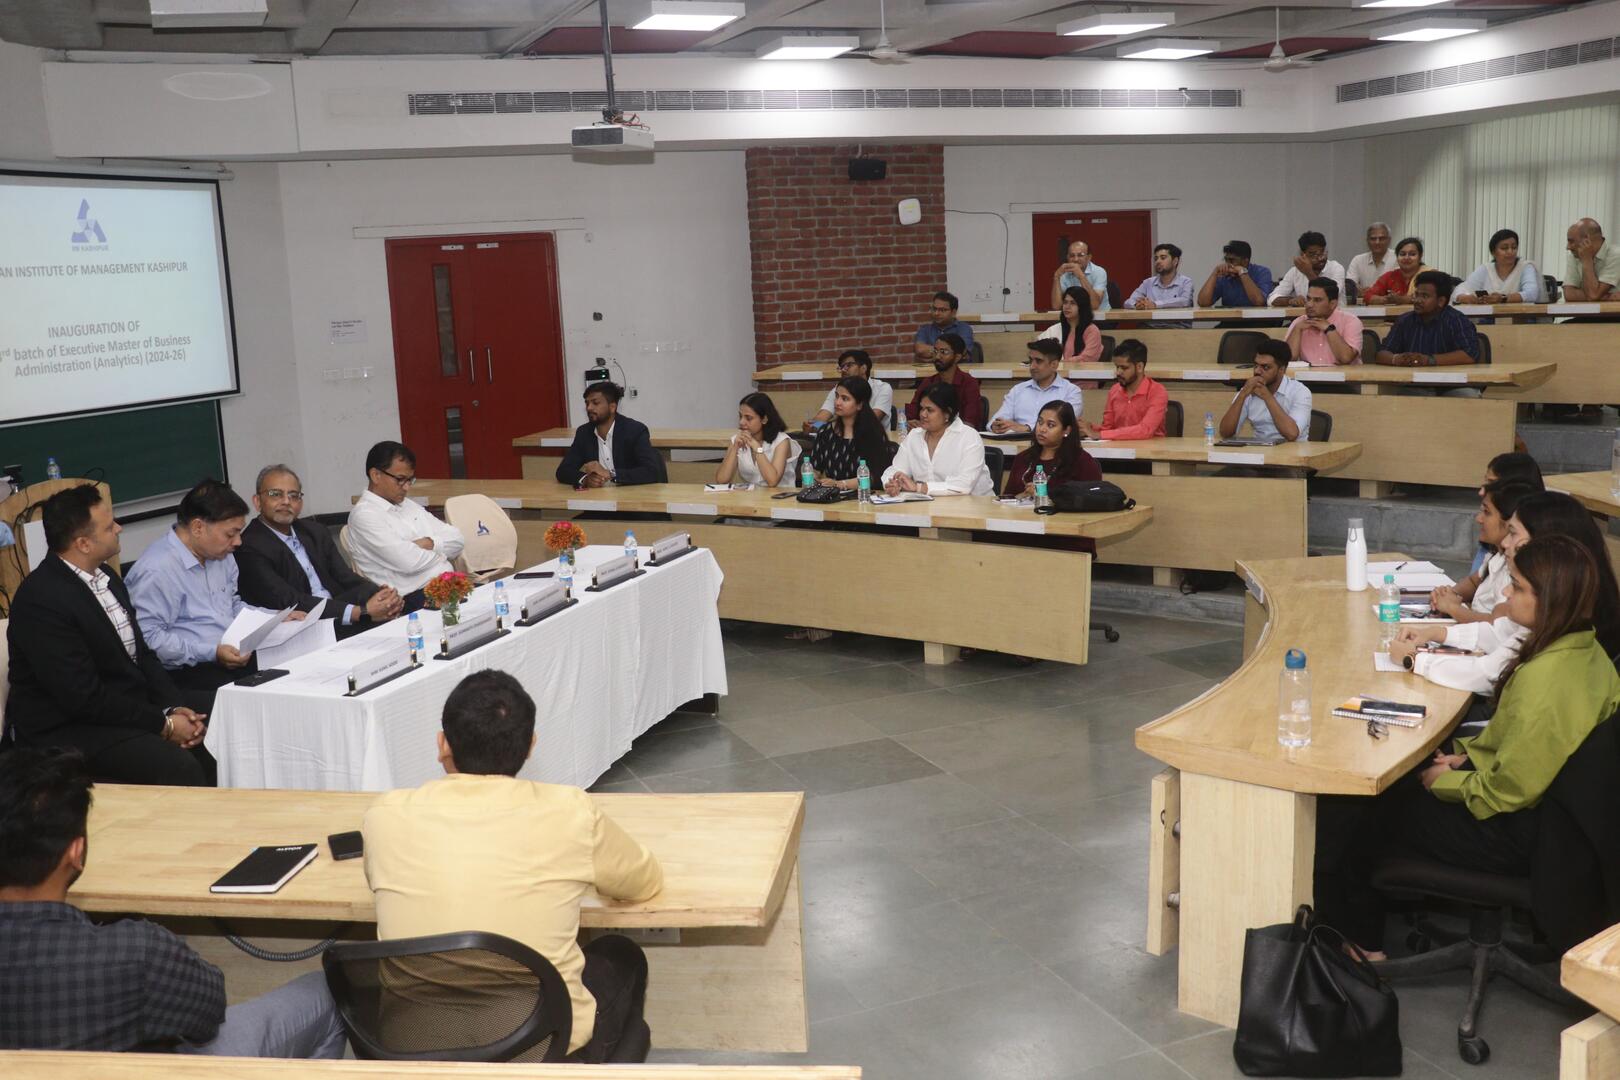 With Executive MBA Analytics, IIM Kashipur is upping the ante of business leaders skilled in analytics